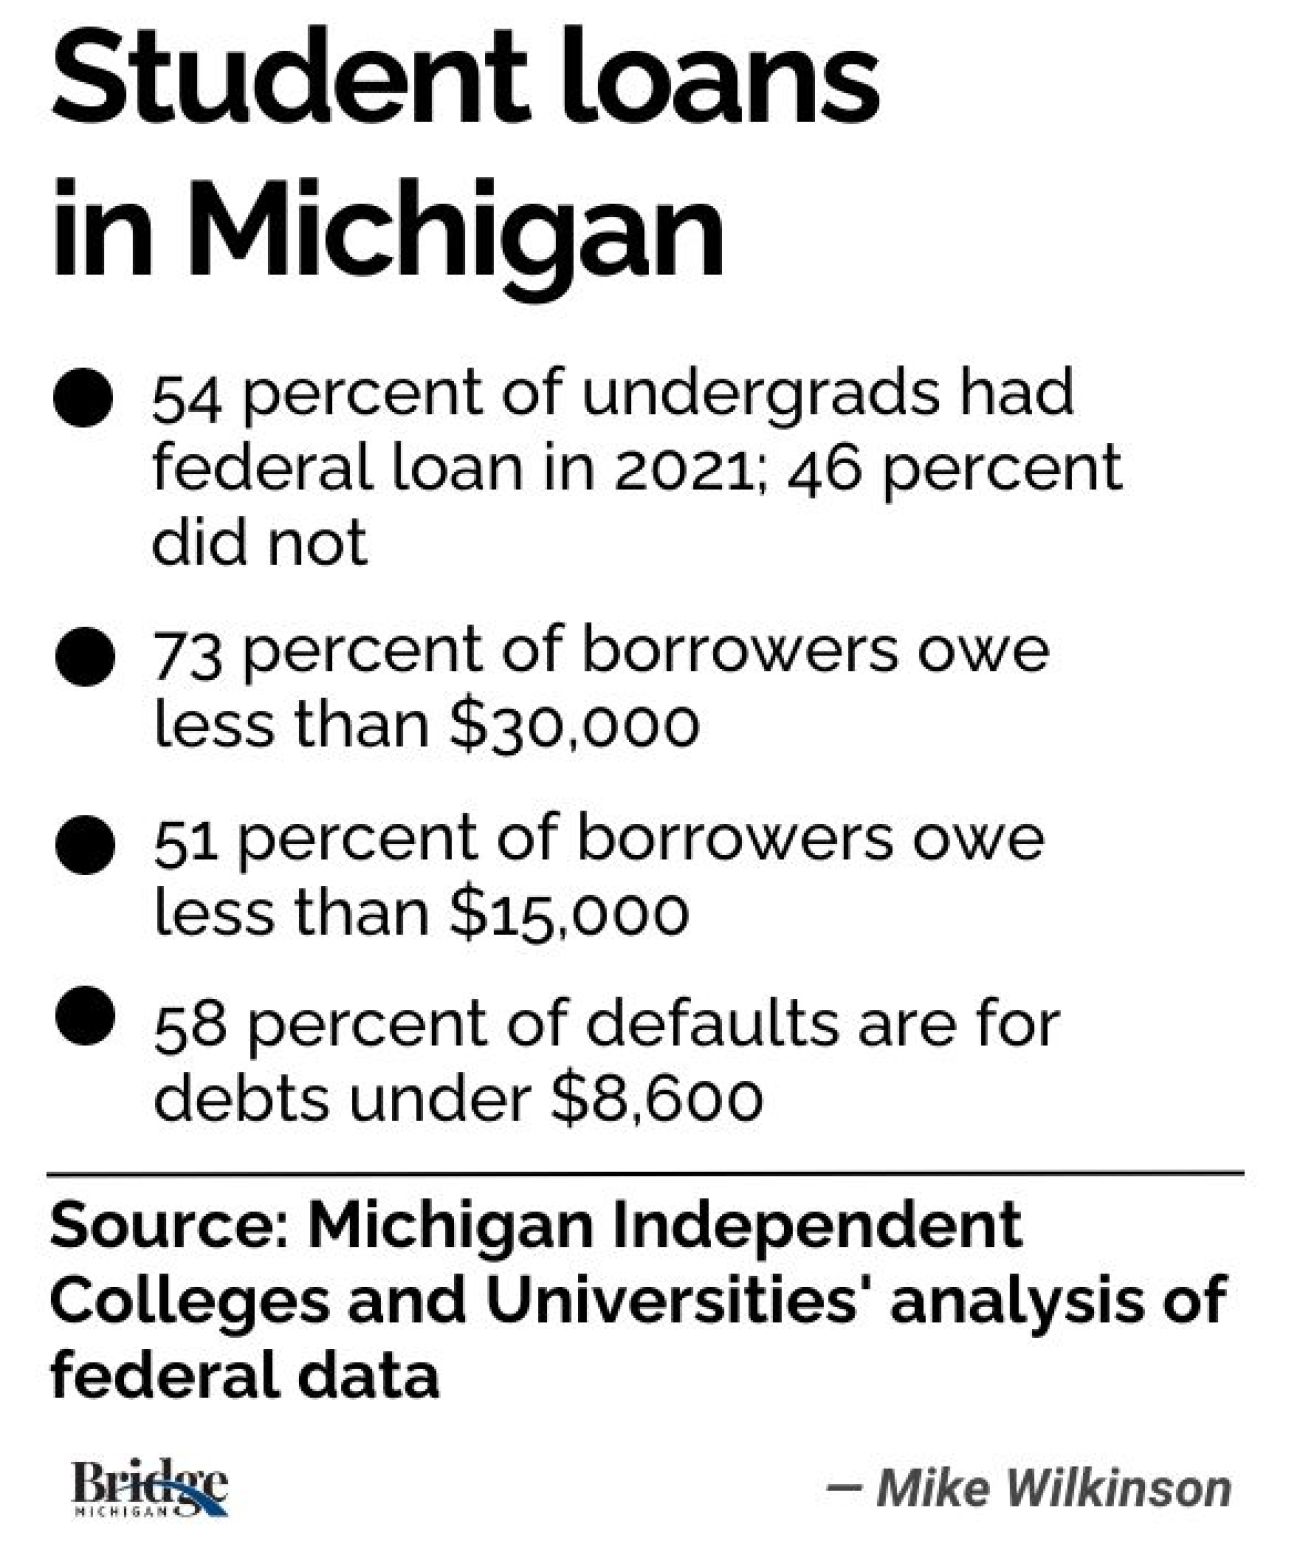 student loans stats about borrowers in Michigan